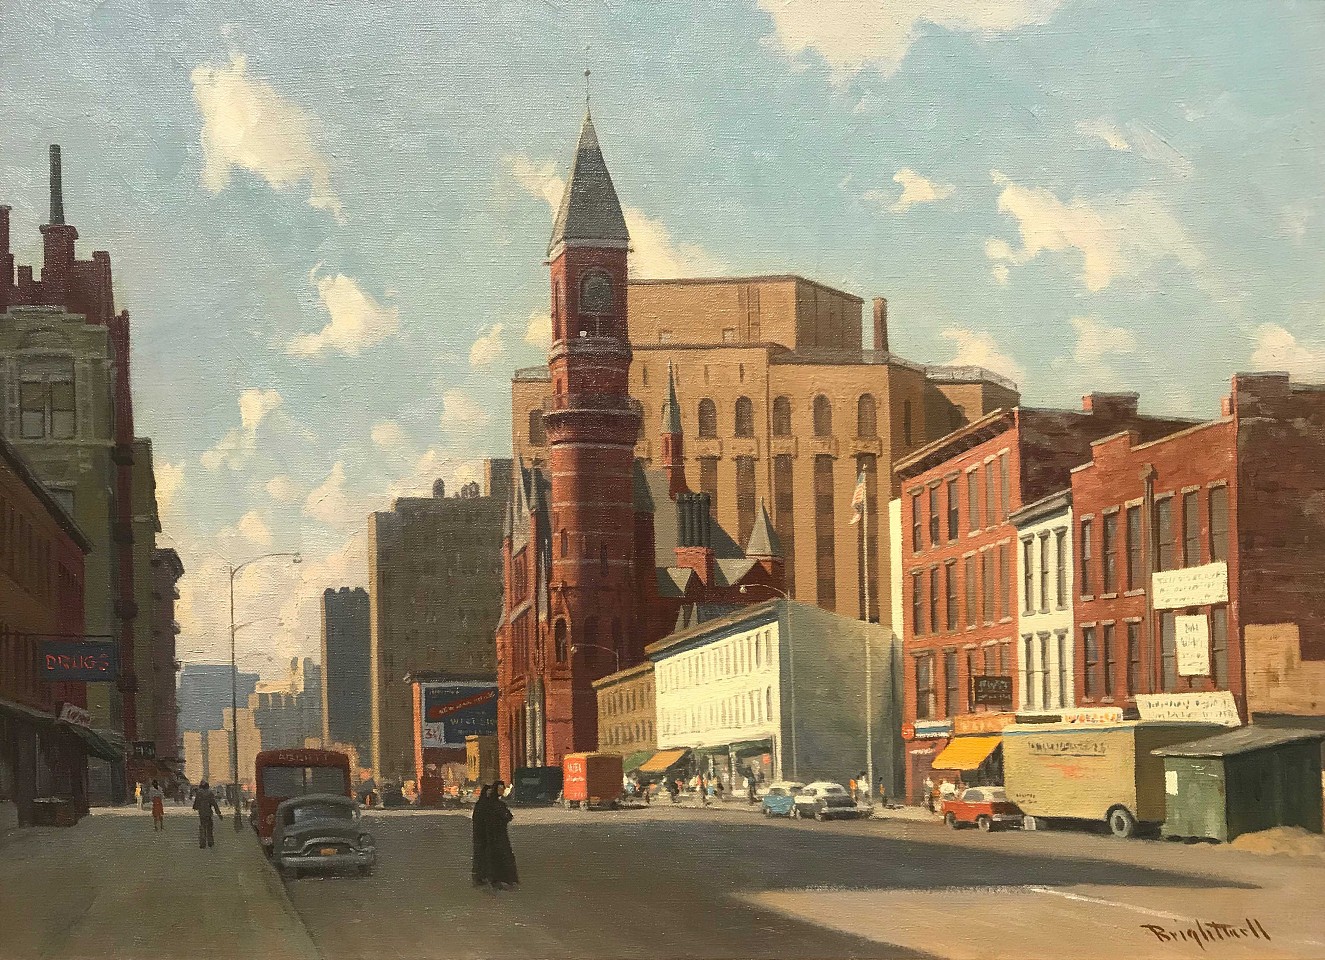 Walter Brightwell, Looking Down 6th Avenue Toward the Jefferson Market Library Building, after 1939
oil on board, 20 x 25 in. (50.8 x 63.5 cm)
WB190401